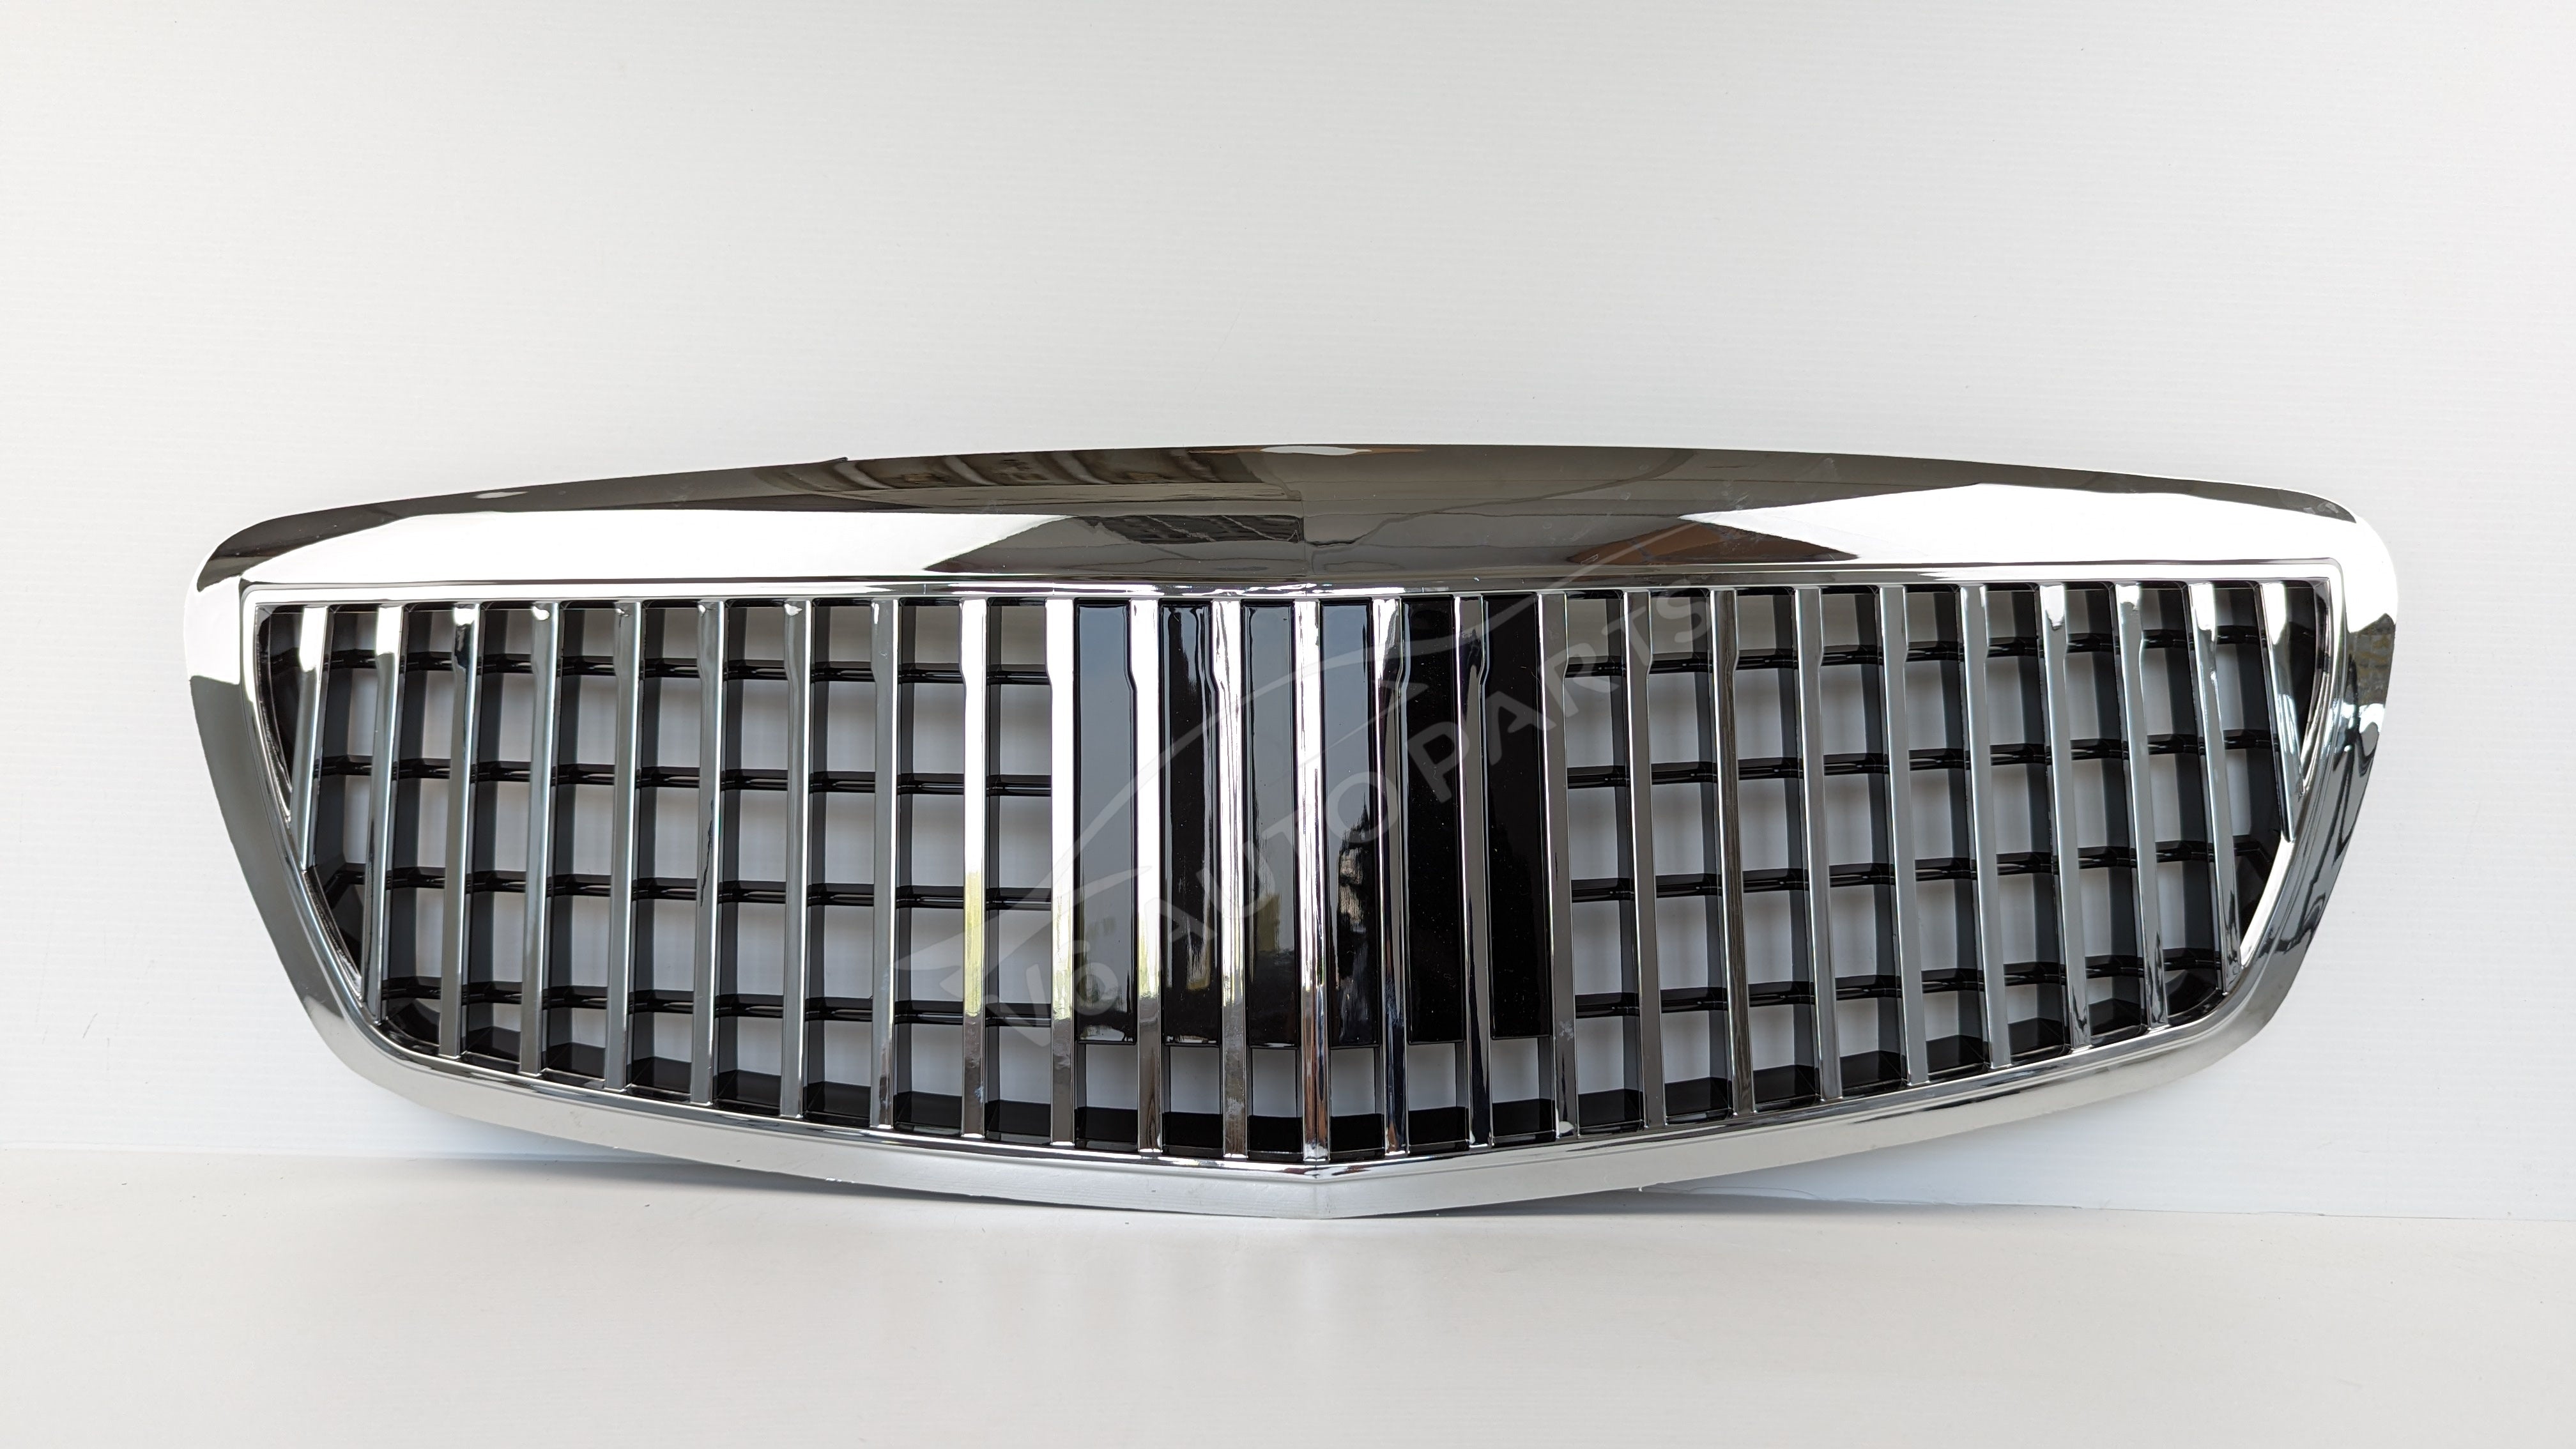 For Mercedes S-Class W221 S300S S63 Front Bumper Chrome Grille 2005-2009 Maybach